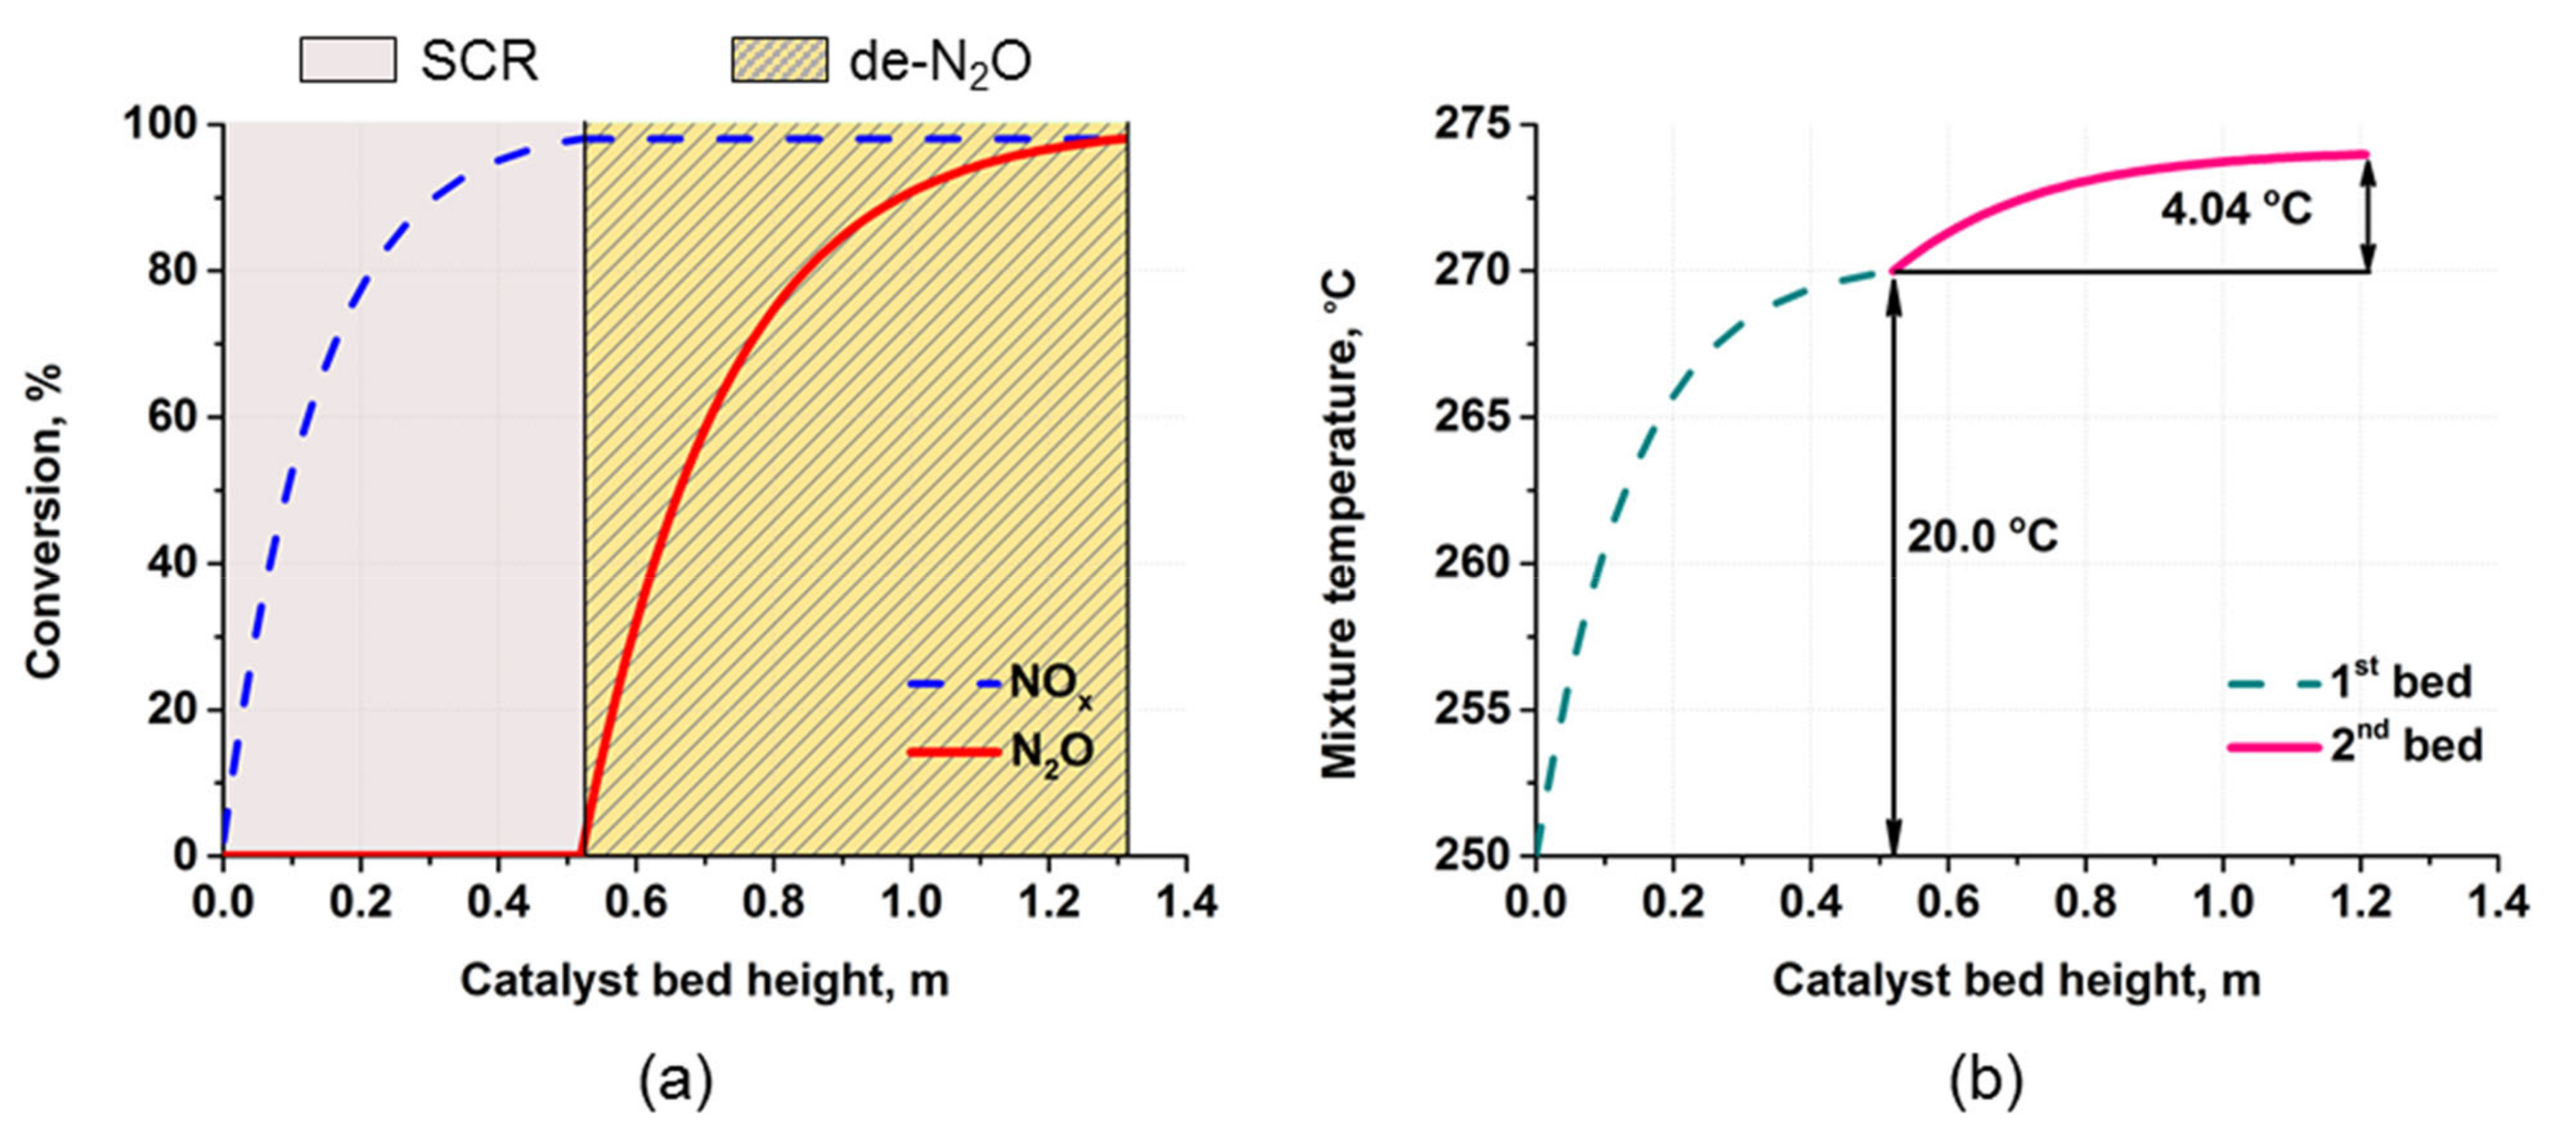 Free N2O-Removal Catalysts for Global Nitric Acid Producers